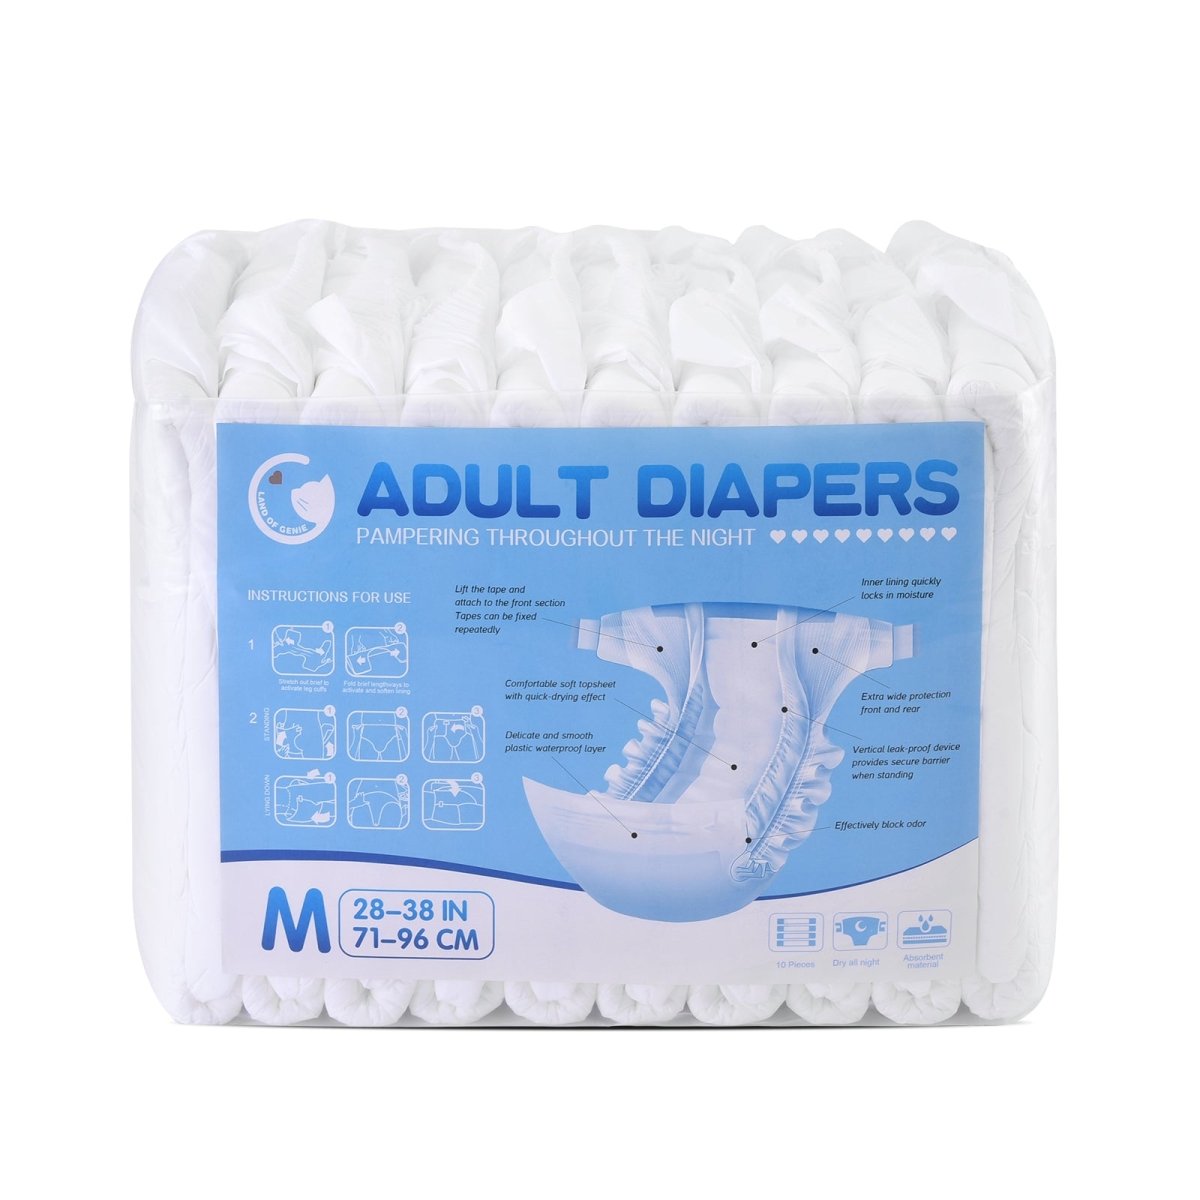  Landofgenie Adult Diapers for Women with Tabs Printed Adult  Diapers ABDL Diapers Medium 10 Pieces (Medium 28-38) : Baby